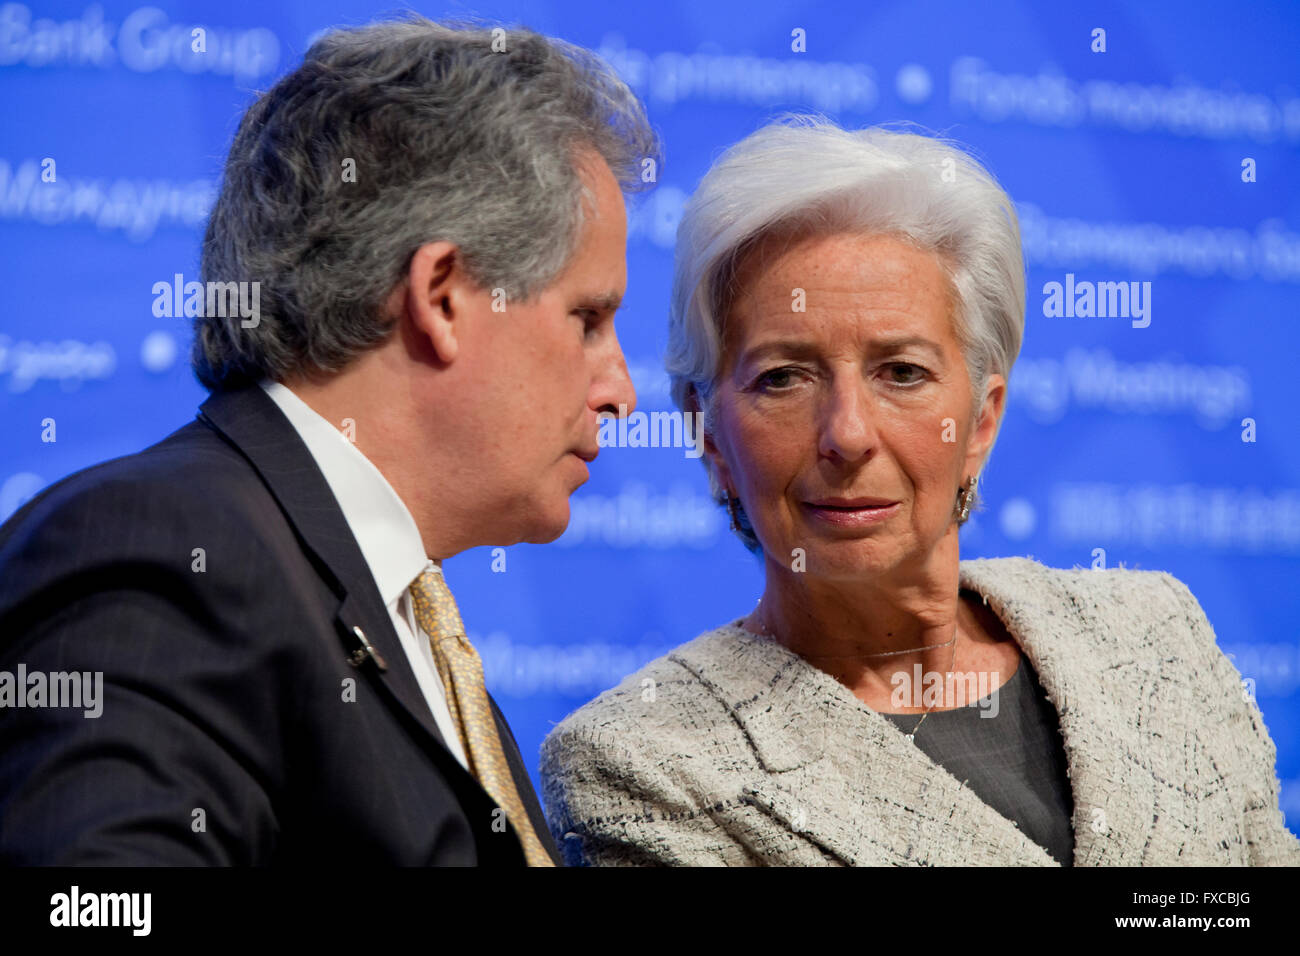 Washington DC, USA. 14th April, 2016.  IMF Managing Director Christine Lagarde briefs the press on the latest updates of the 2016 Annual Meetings. Credit:  B Christopher/Alamy Live News Stock Photo